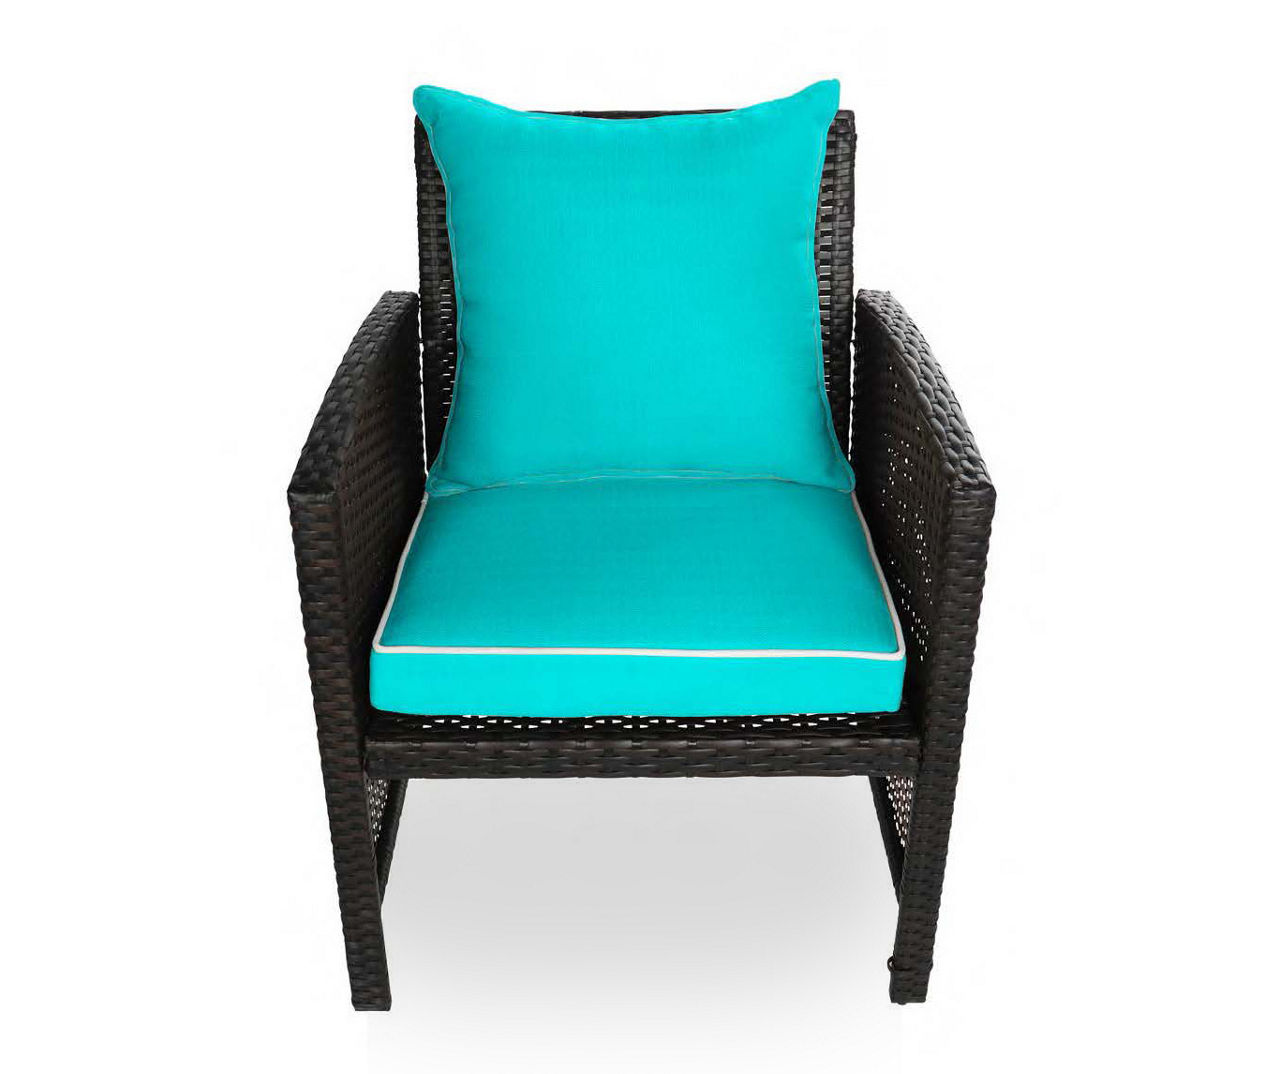 Turquoise 4-Piece Deluxe Outdoor Chair Cushion Set